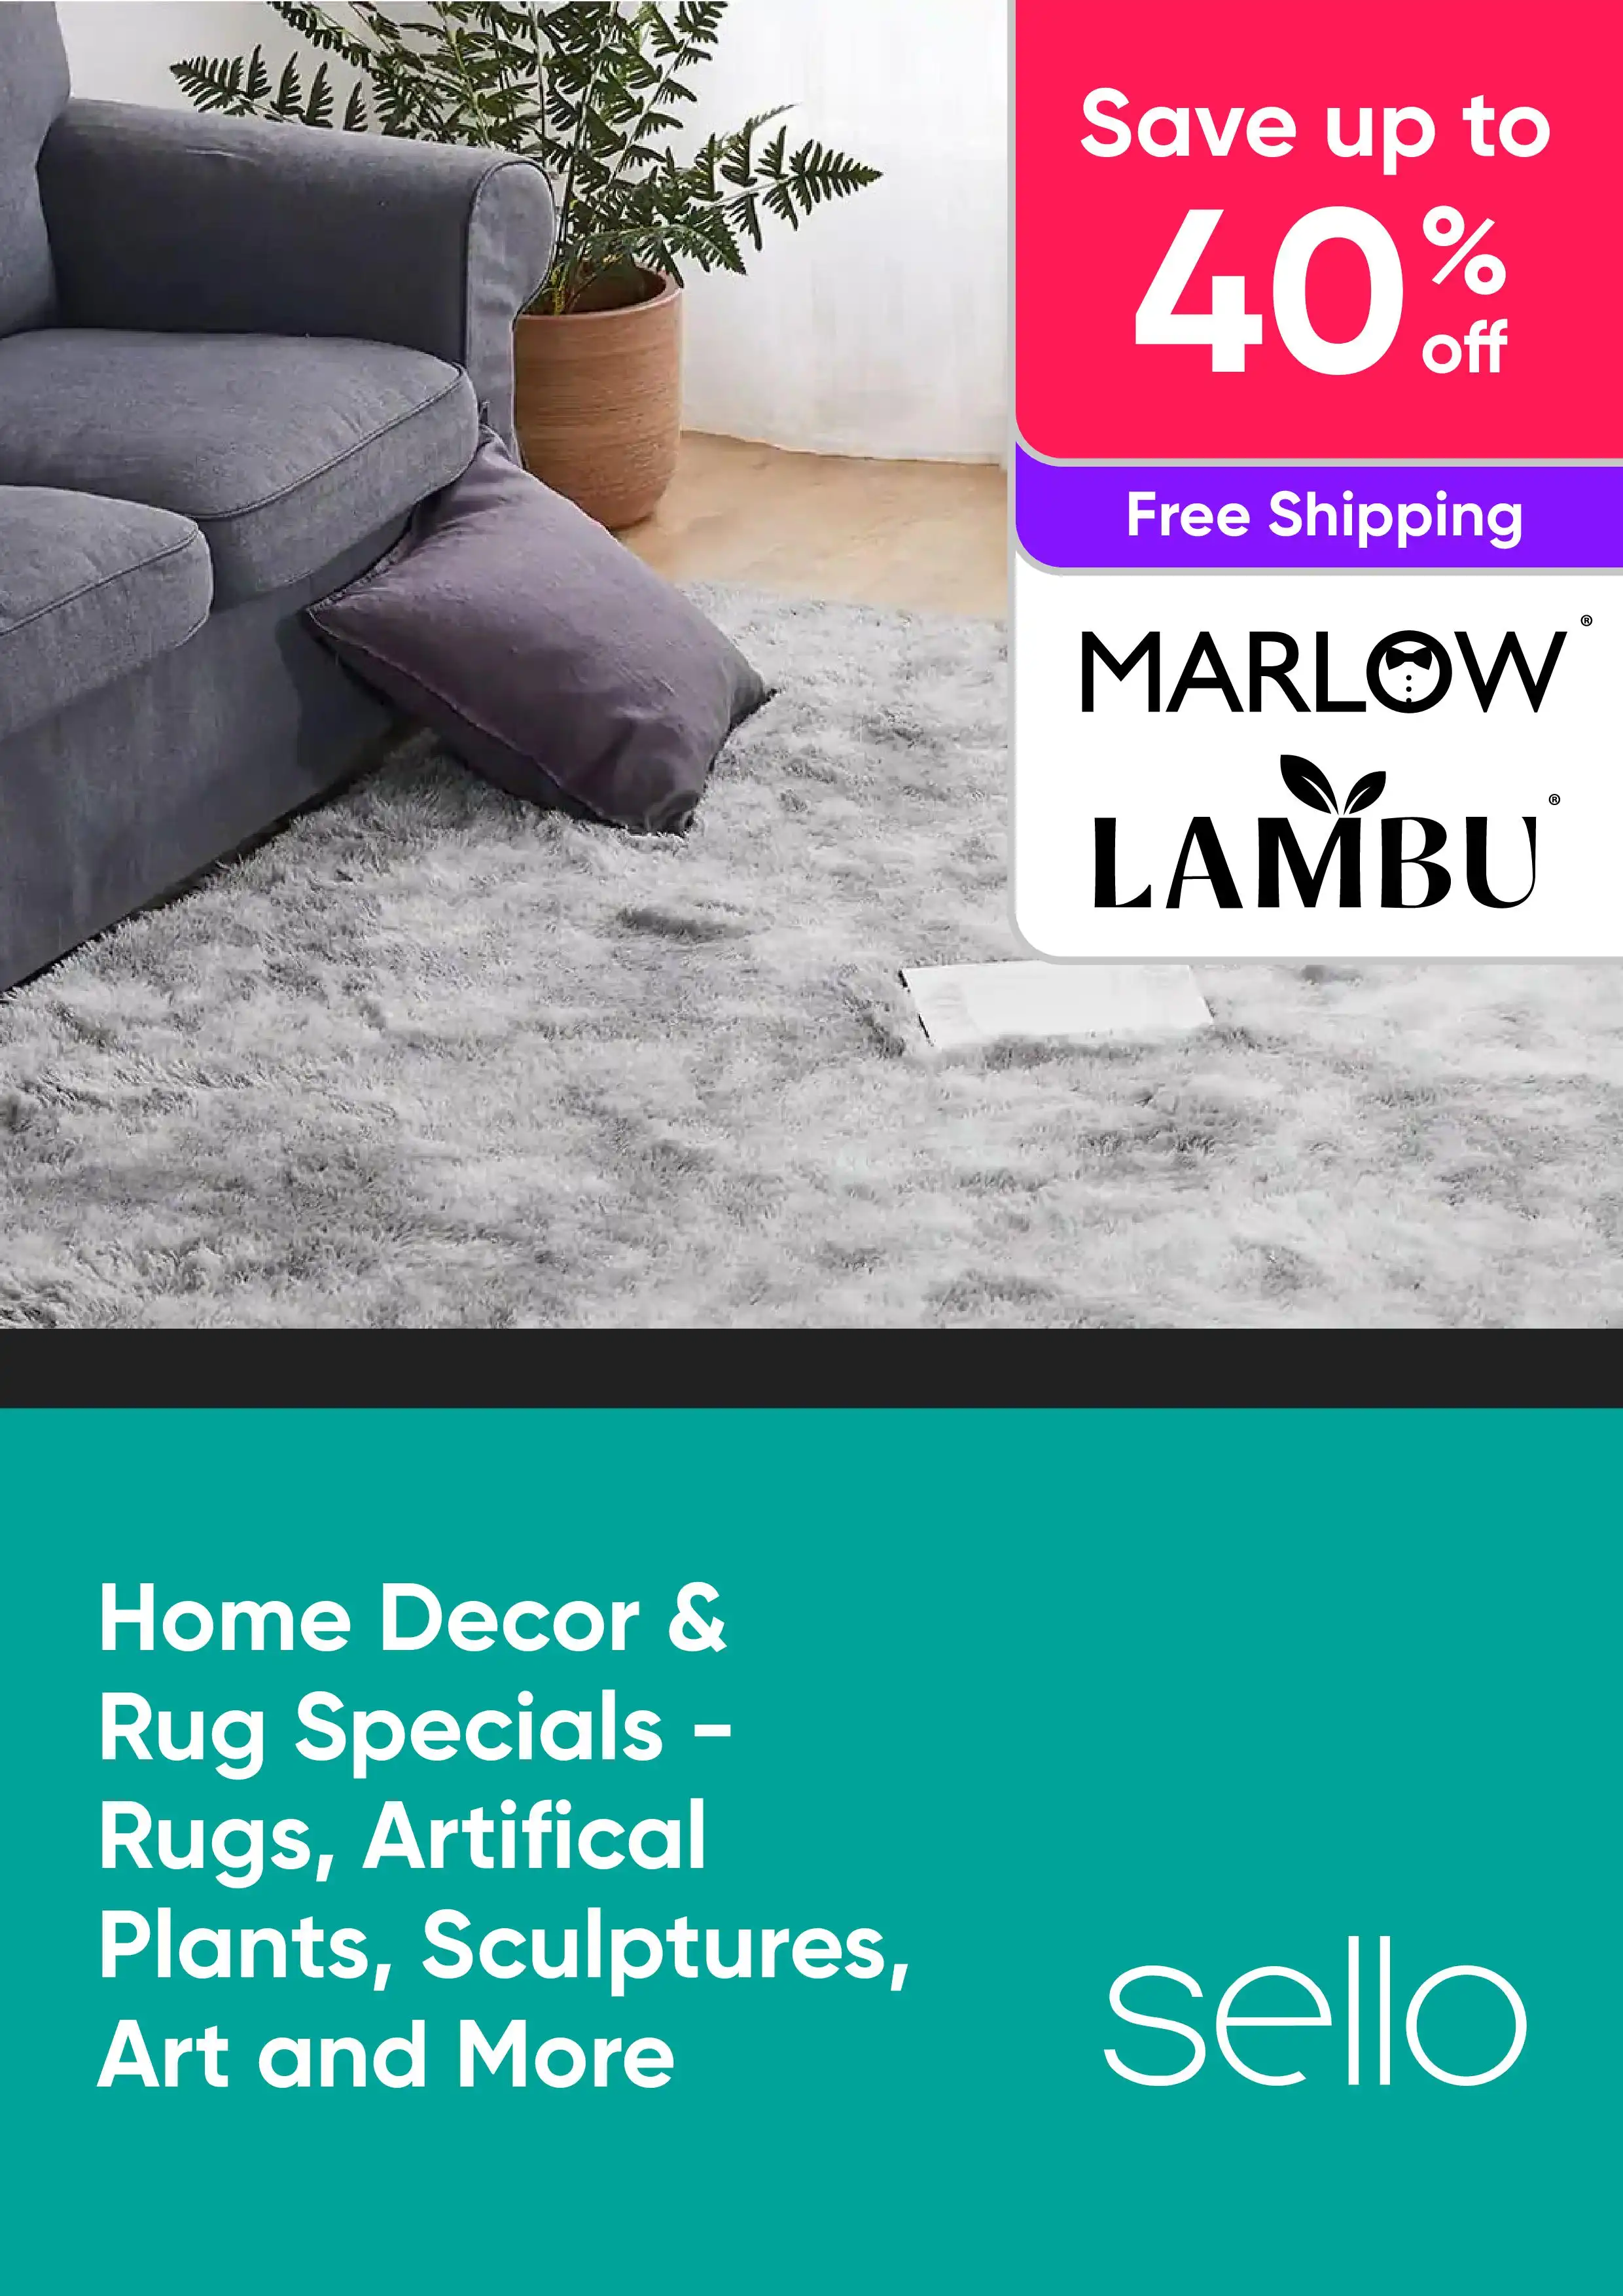 Home Decor & Rug Specials - Rugs, Artificial Plants, Sculptures, Art and More - Marlow, Lambu - Up to 40% Off